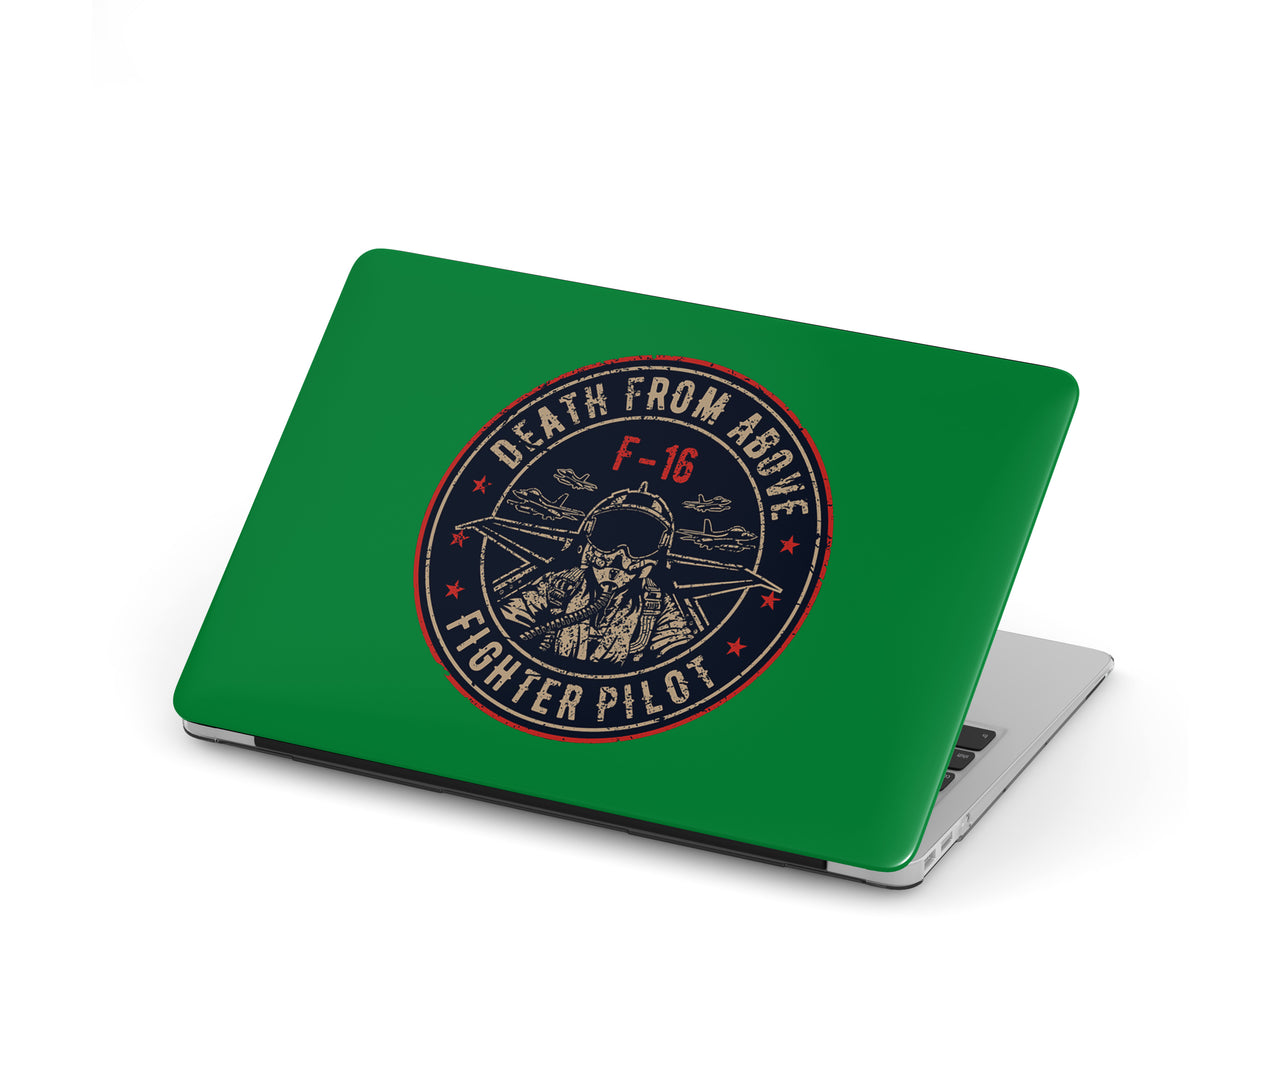 Fighting Falcon F16 - Death From Above Designed Macbook Cases